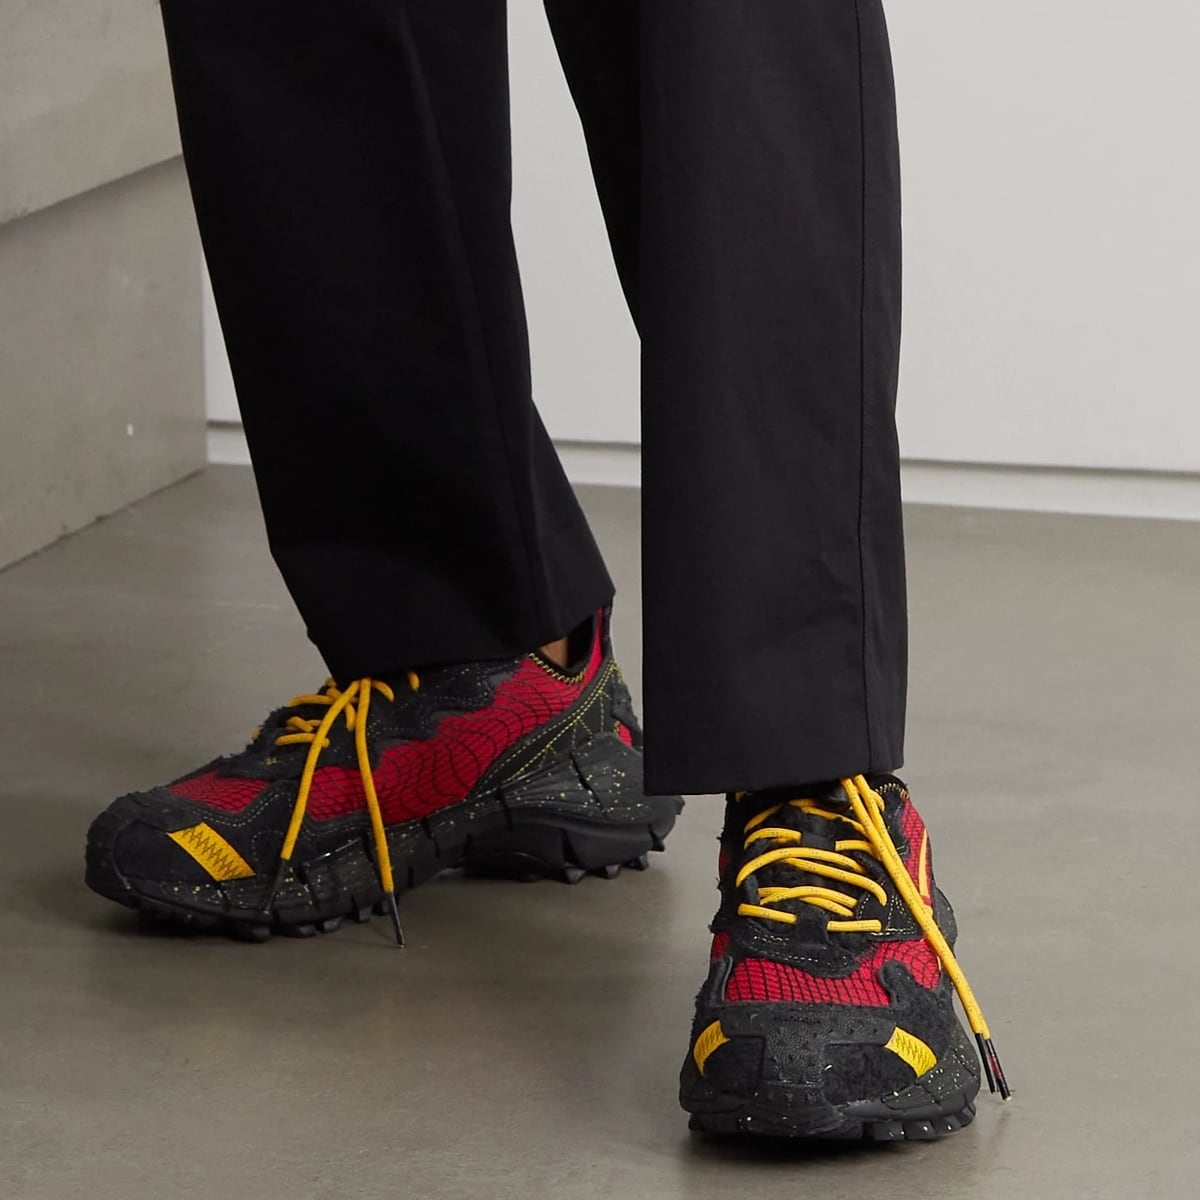 Reebok collaborated with musician A$AP NAST to create these 'Zig Kinetica II Edge' sneakers